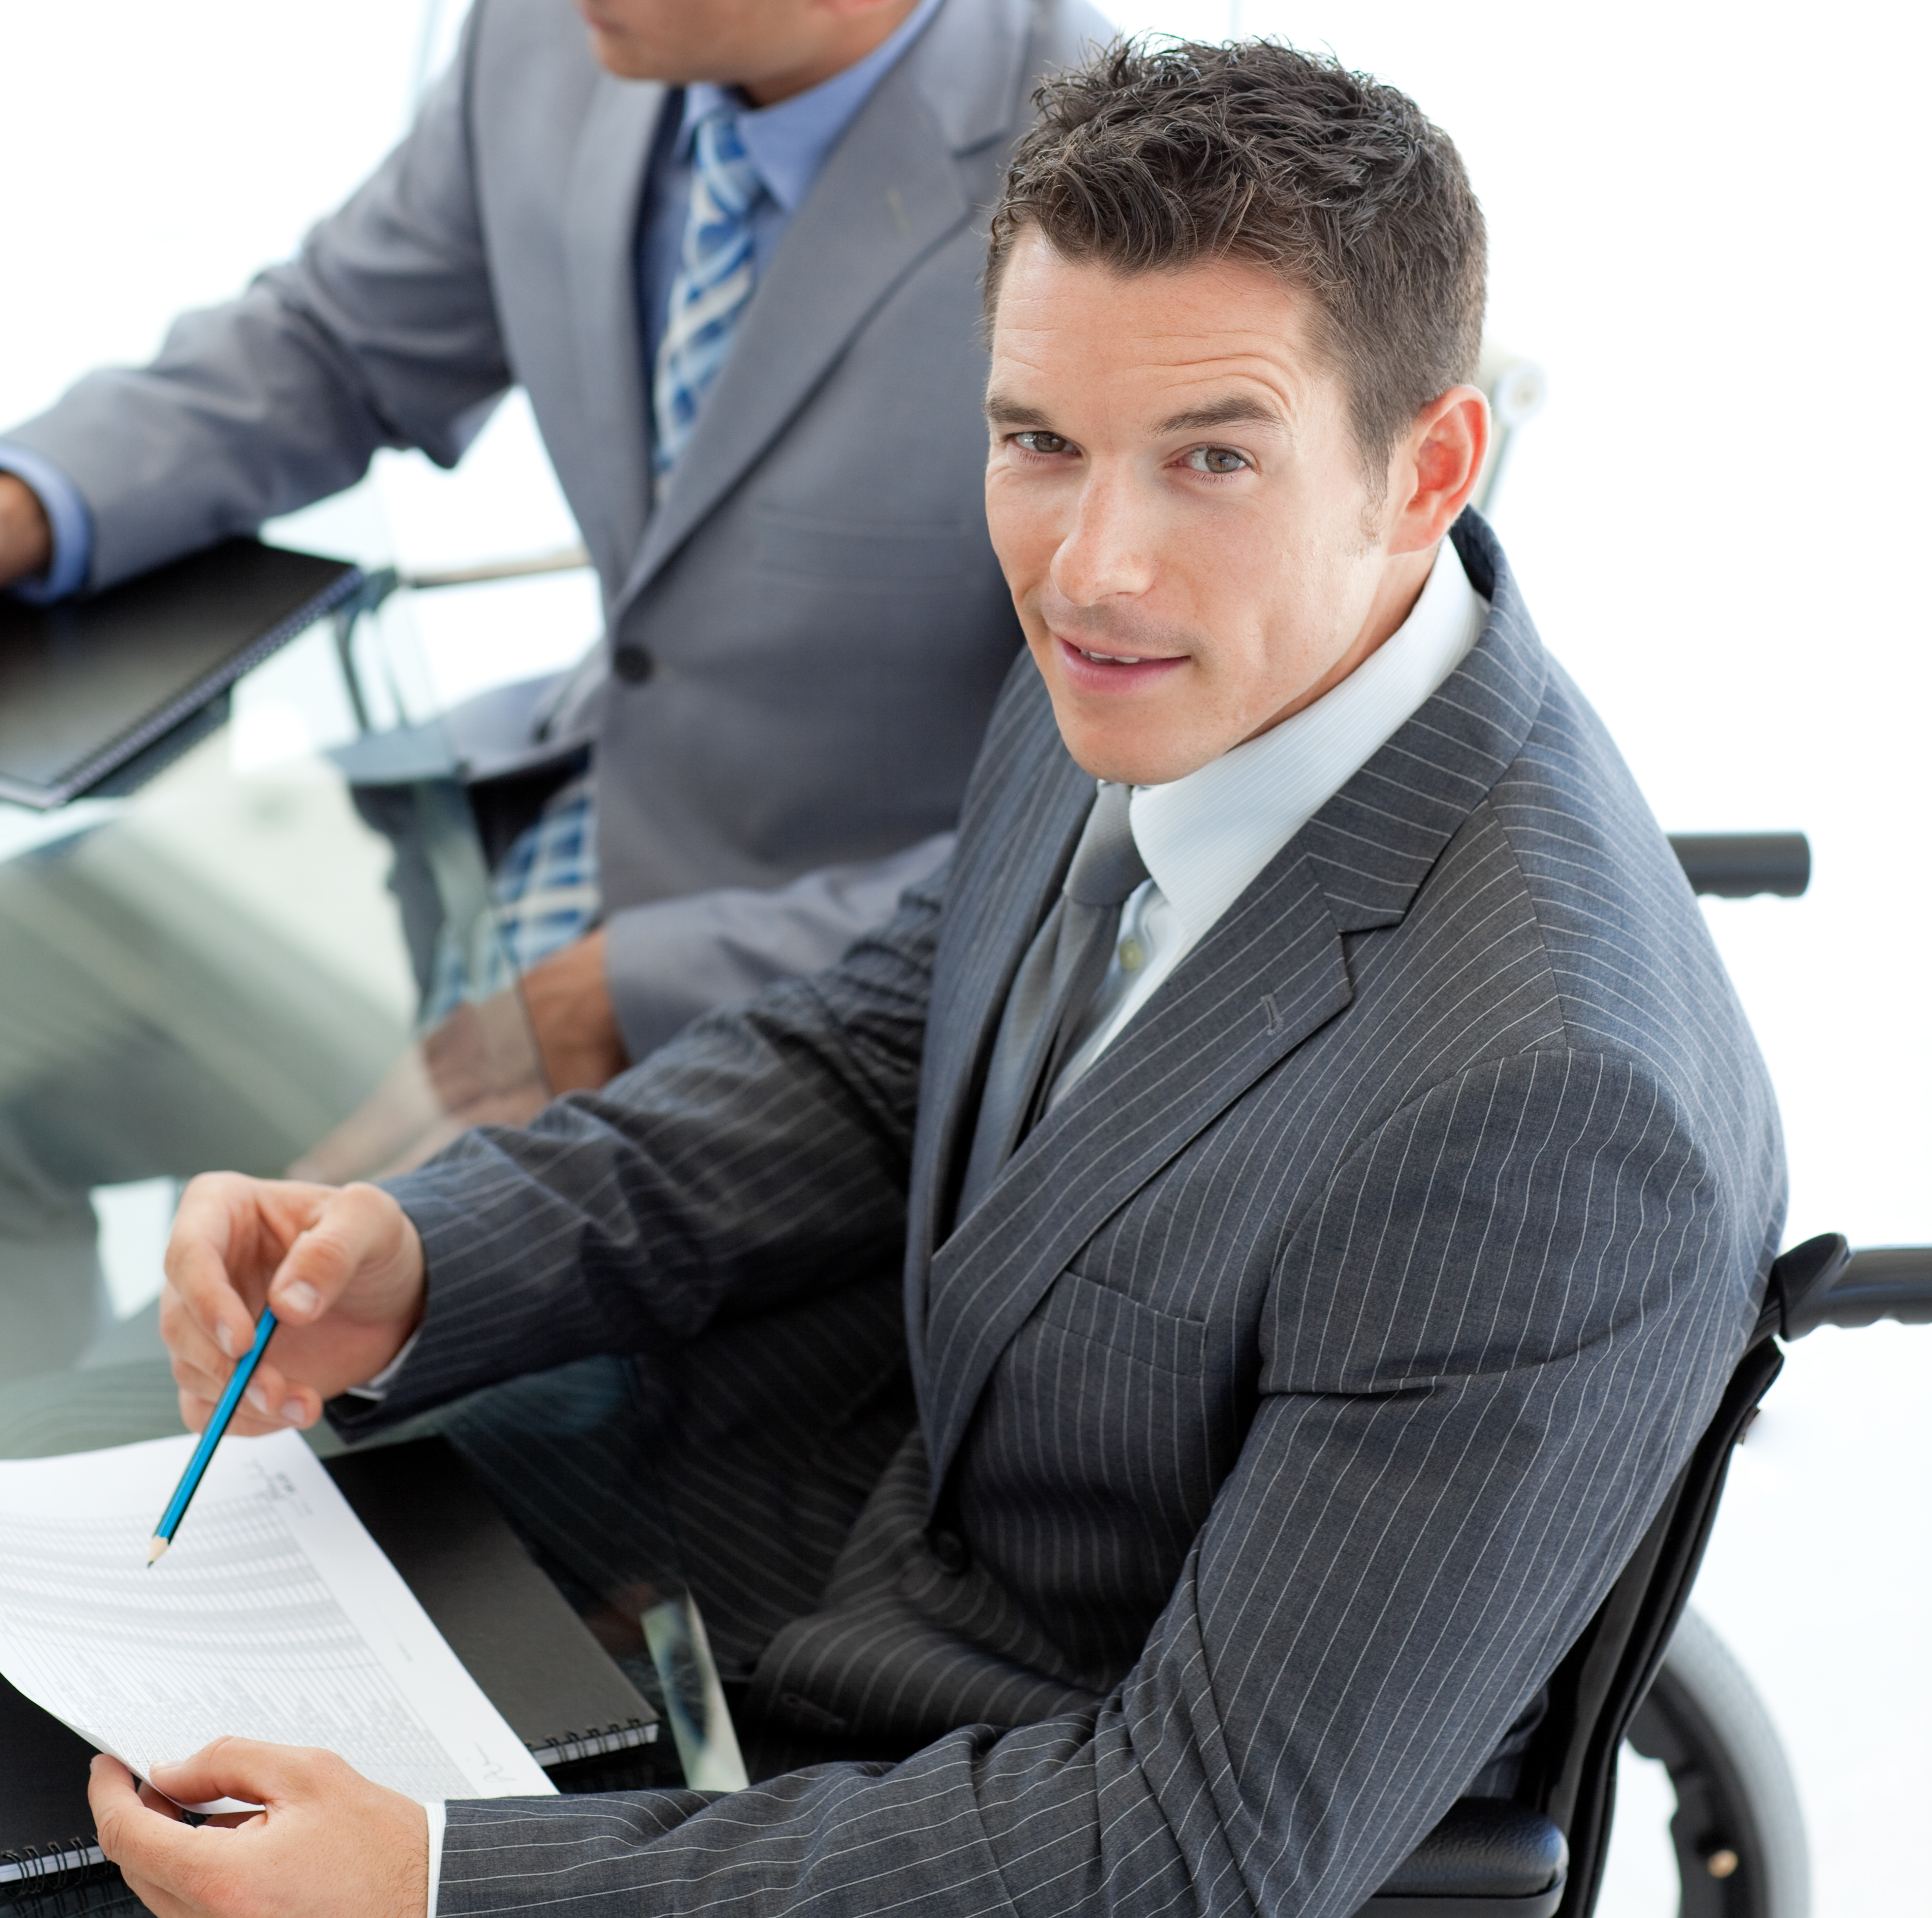 two men wearing suits, one in a wheelchair, providing Job Interview Guidance